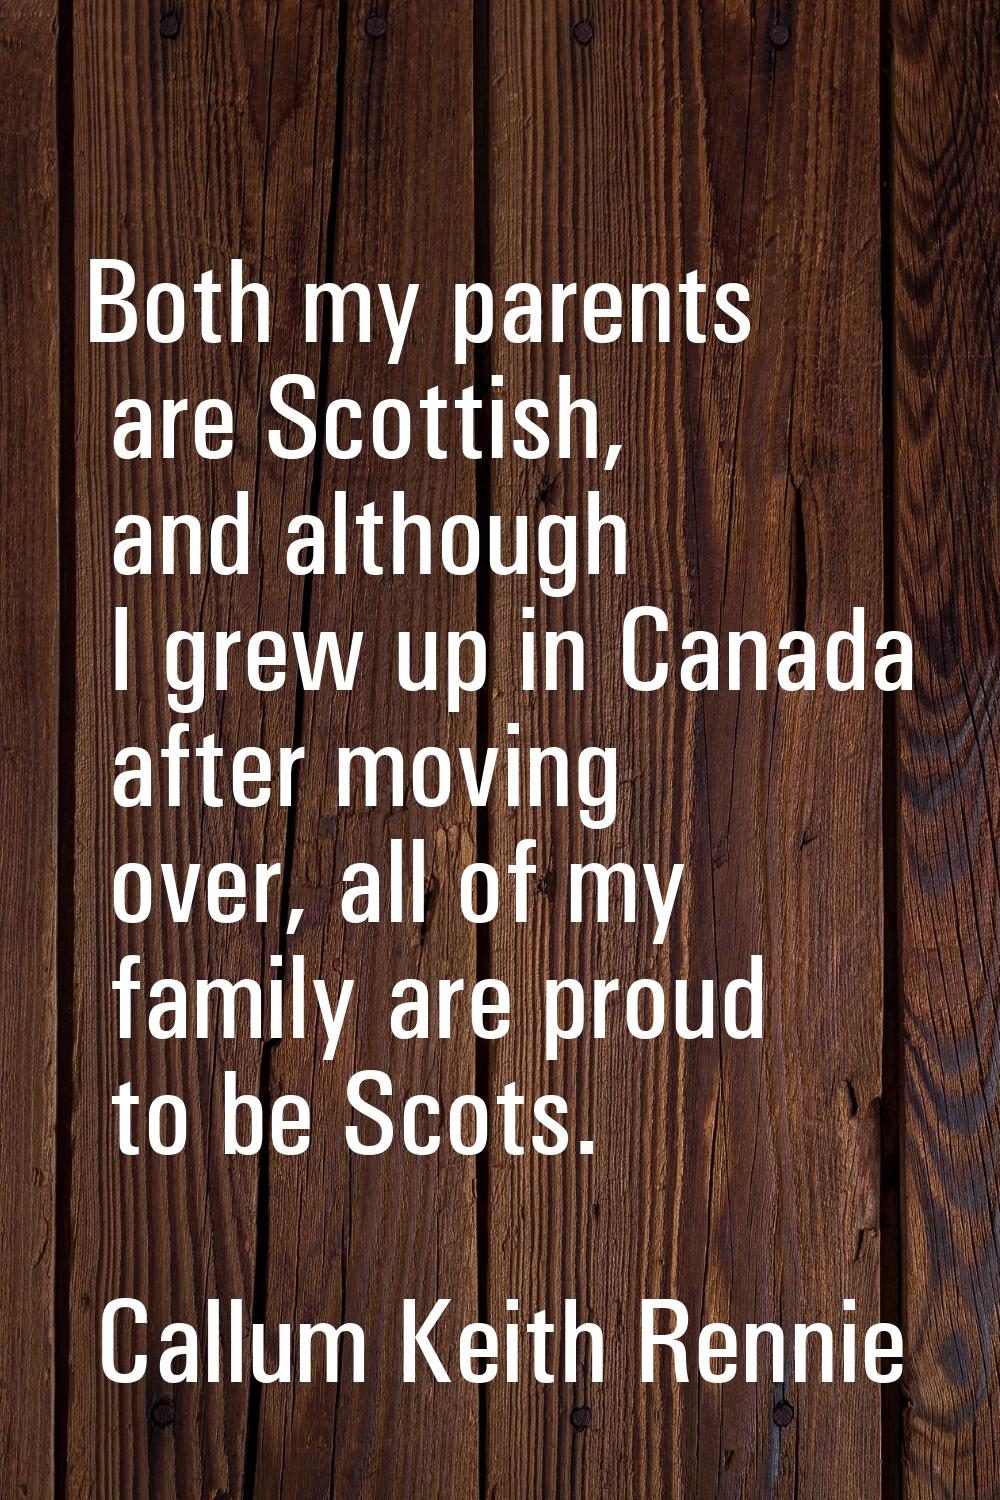 Both my parents are Scottish, and although I grew up in Canada after moving over, all of my family 